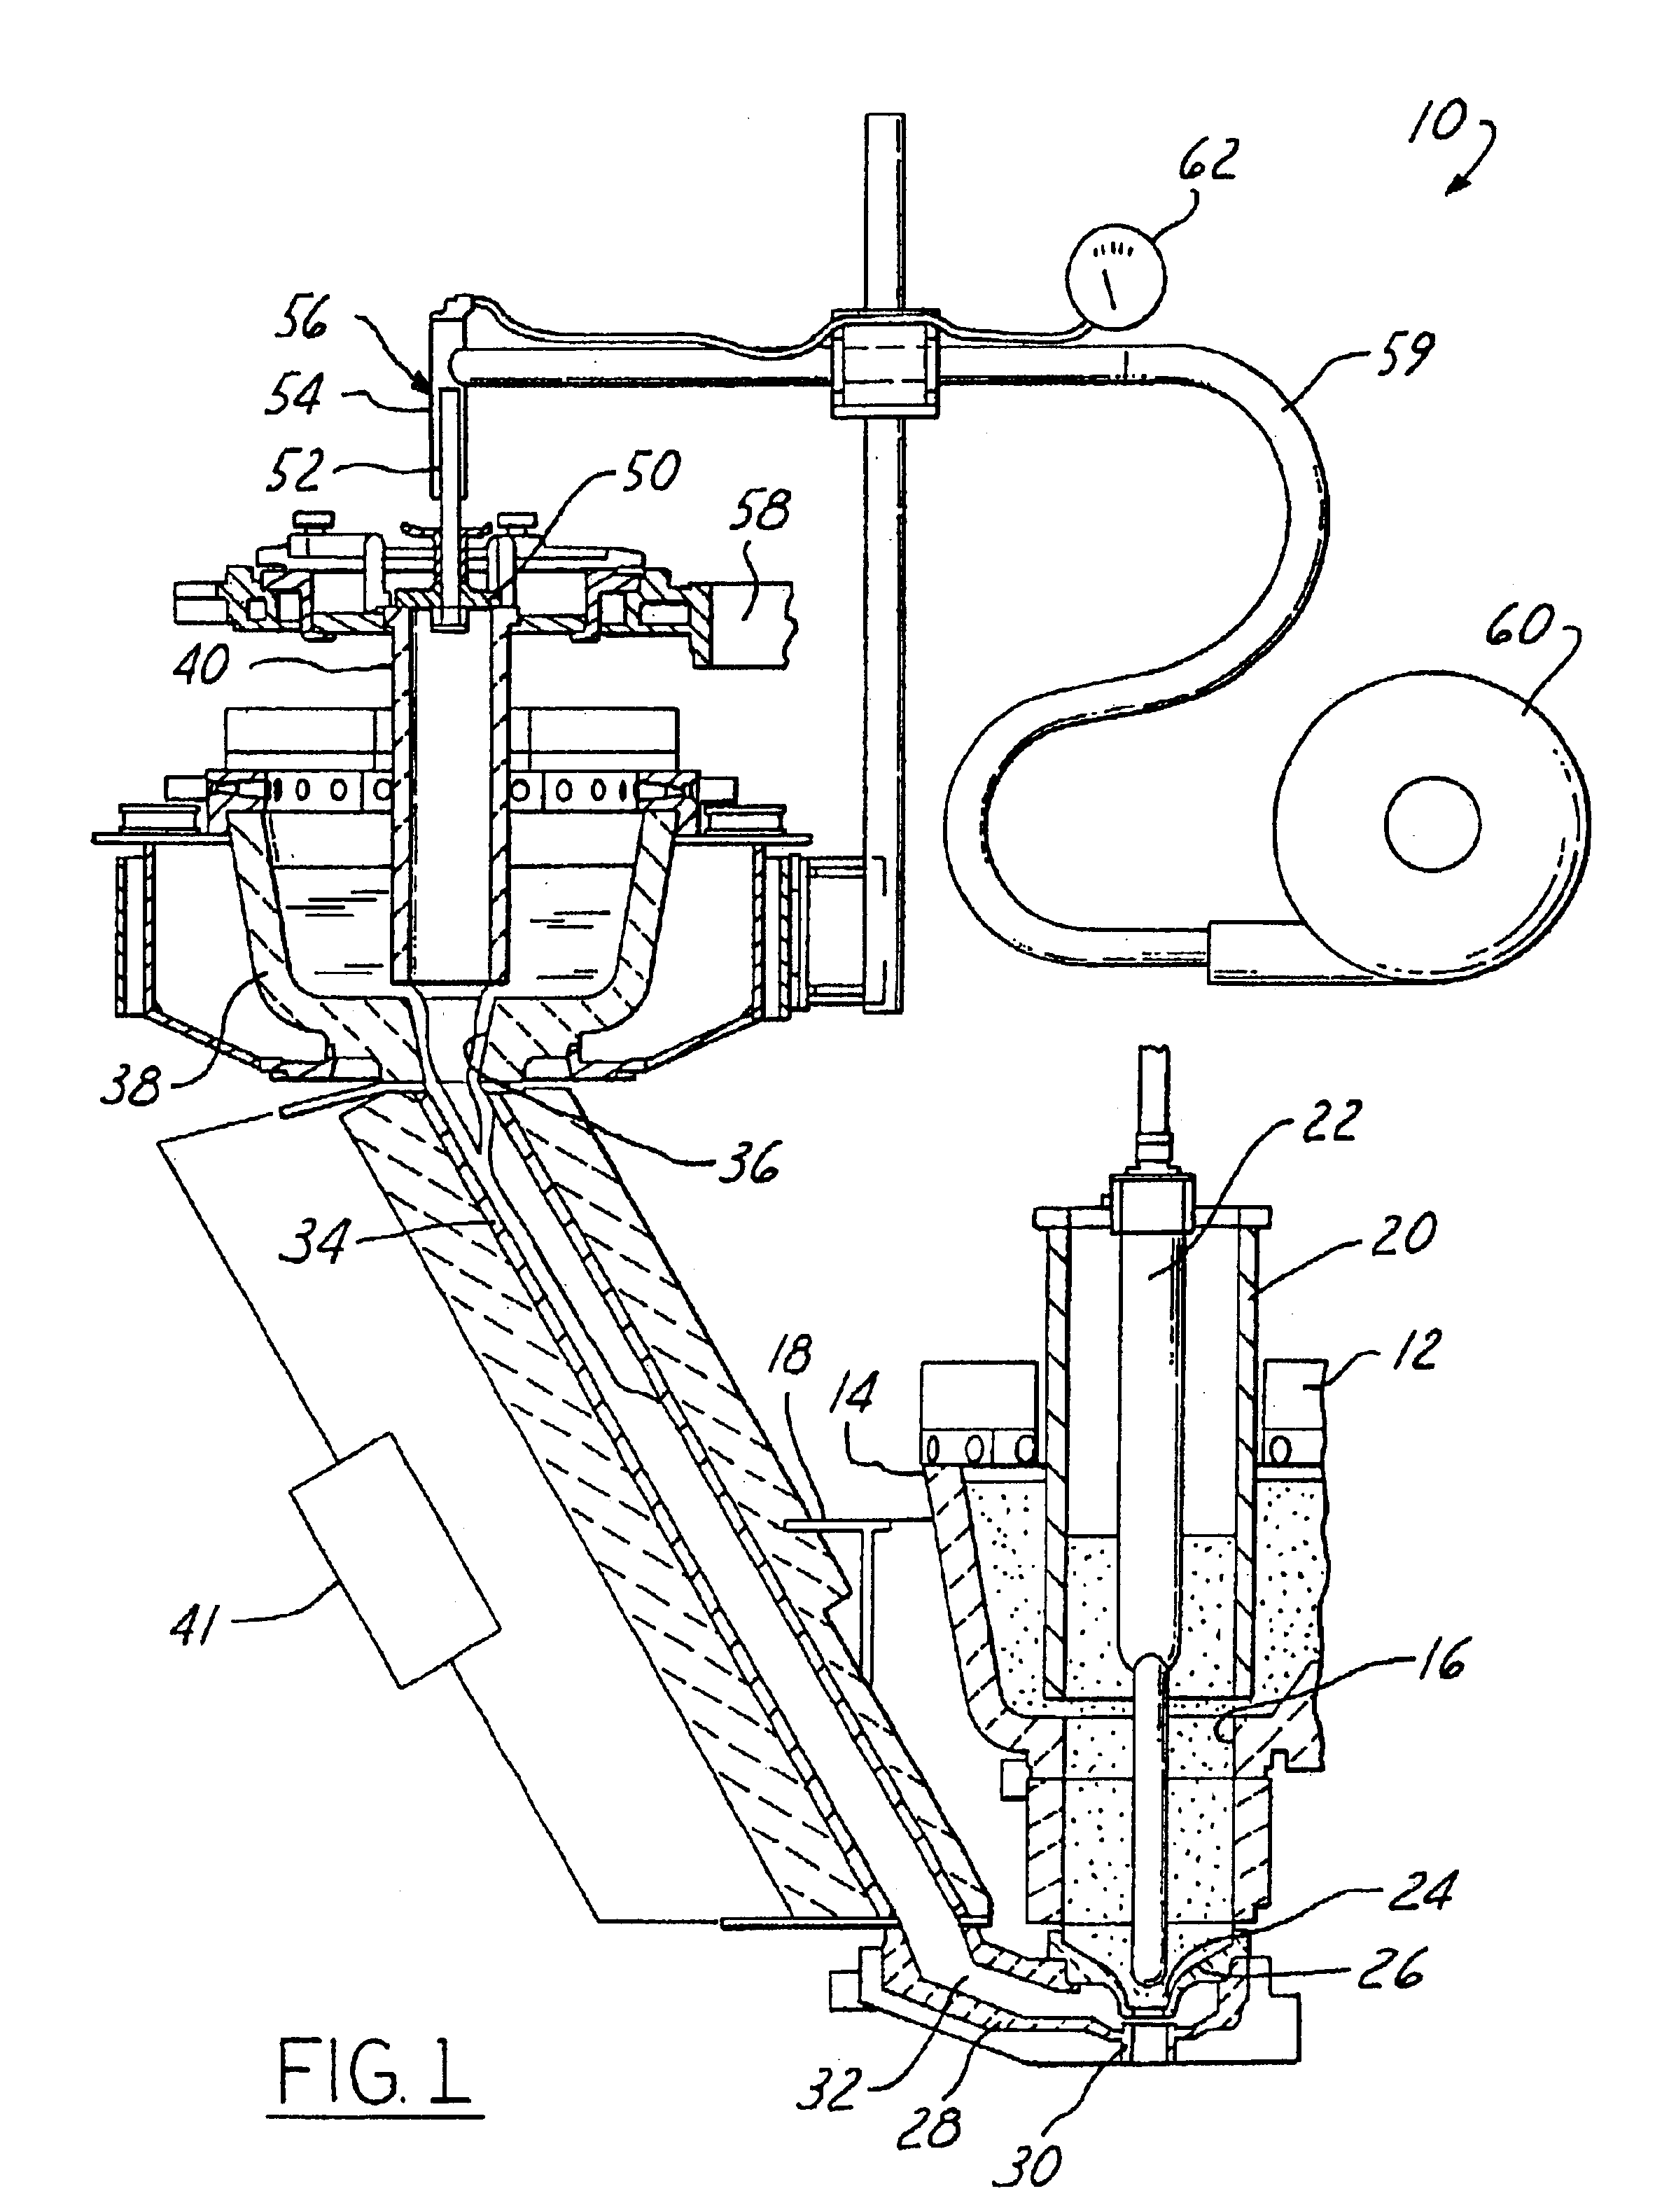 Method and apparatus for delivering a cased glass stream